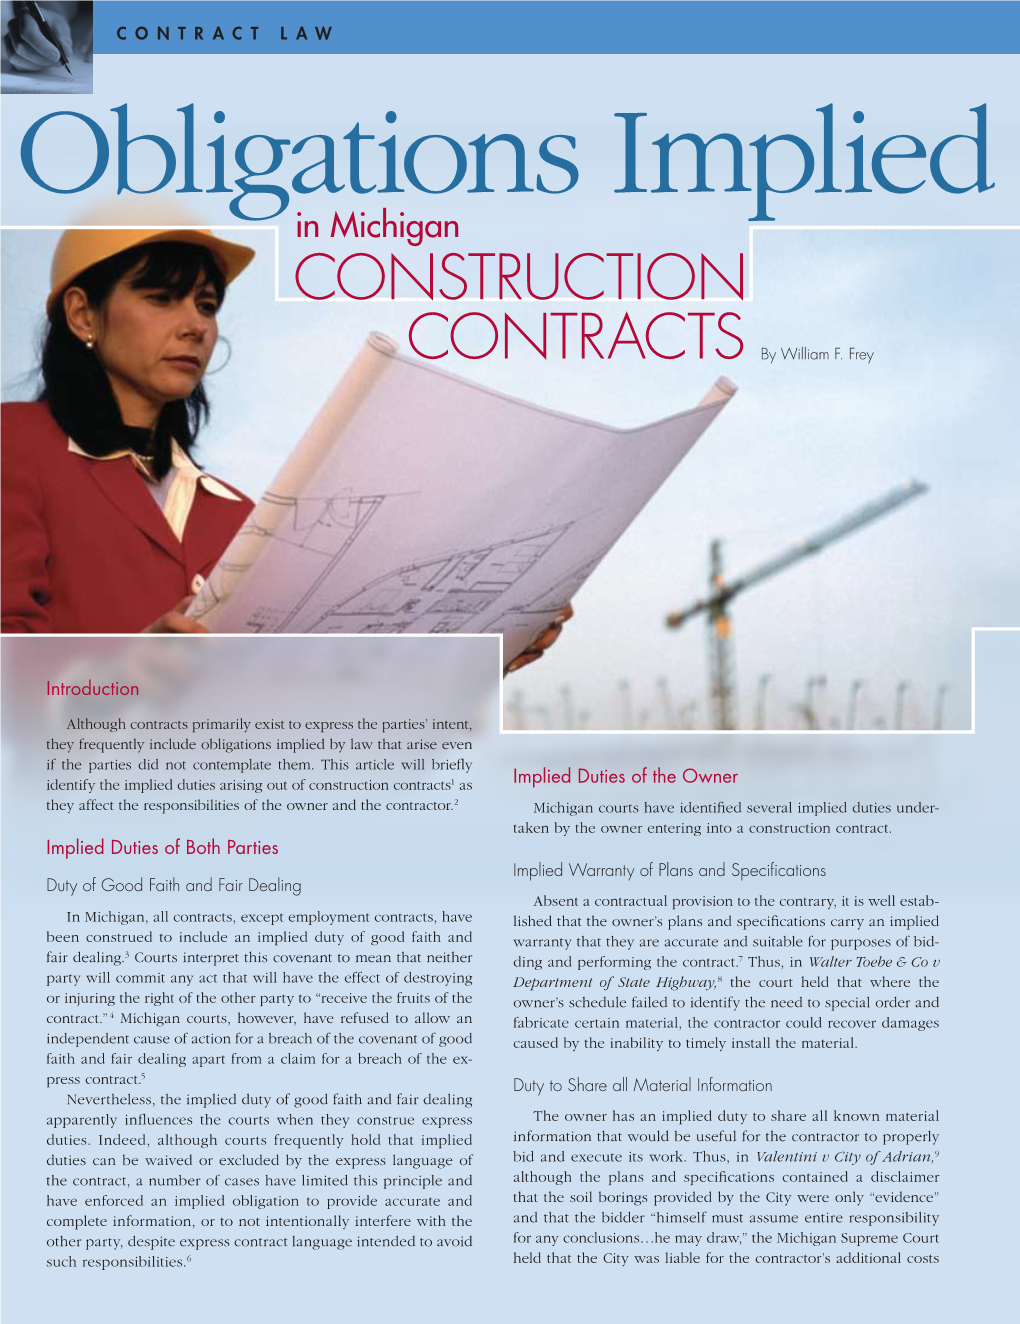 CONSTRUCTION CONTRACTS by William F